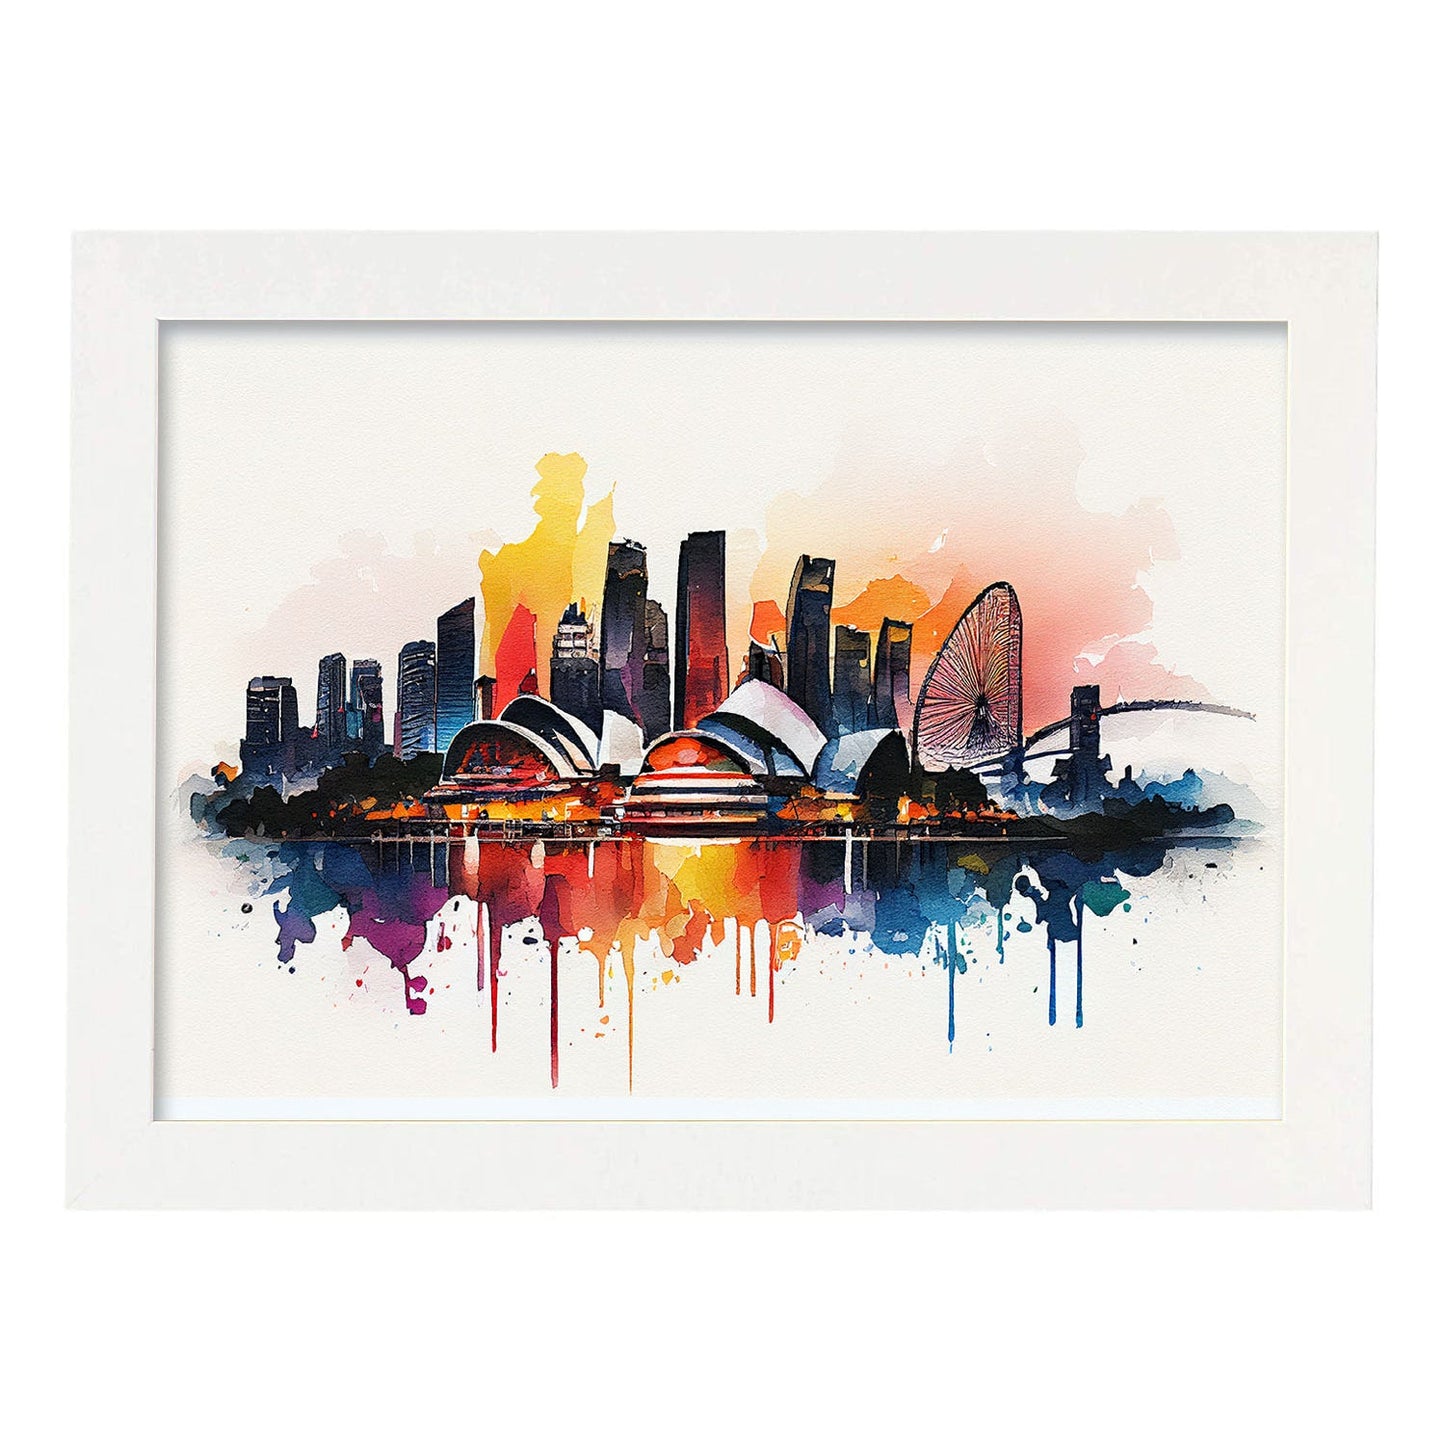 Nacnic watercolor of a skyline of the city of Singapore_2. Aesthetic Wall Art Prints for Bedroom or Living Room Design.-Artwork-Nacnic-A4-Marco Blanco-Nacnic Estudio SL